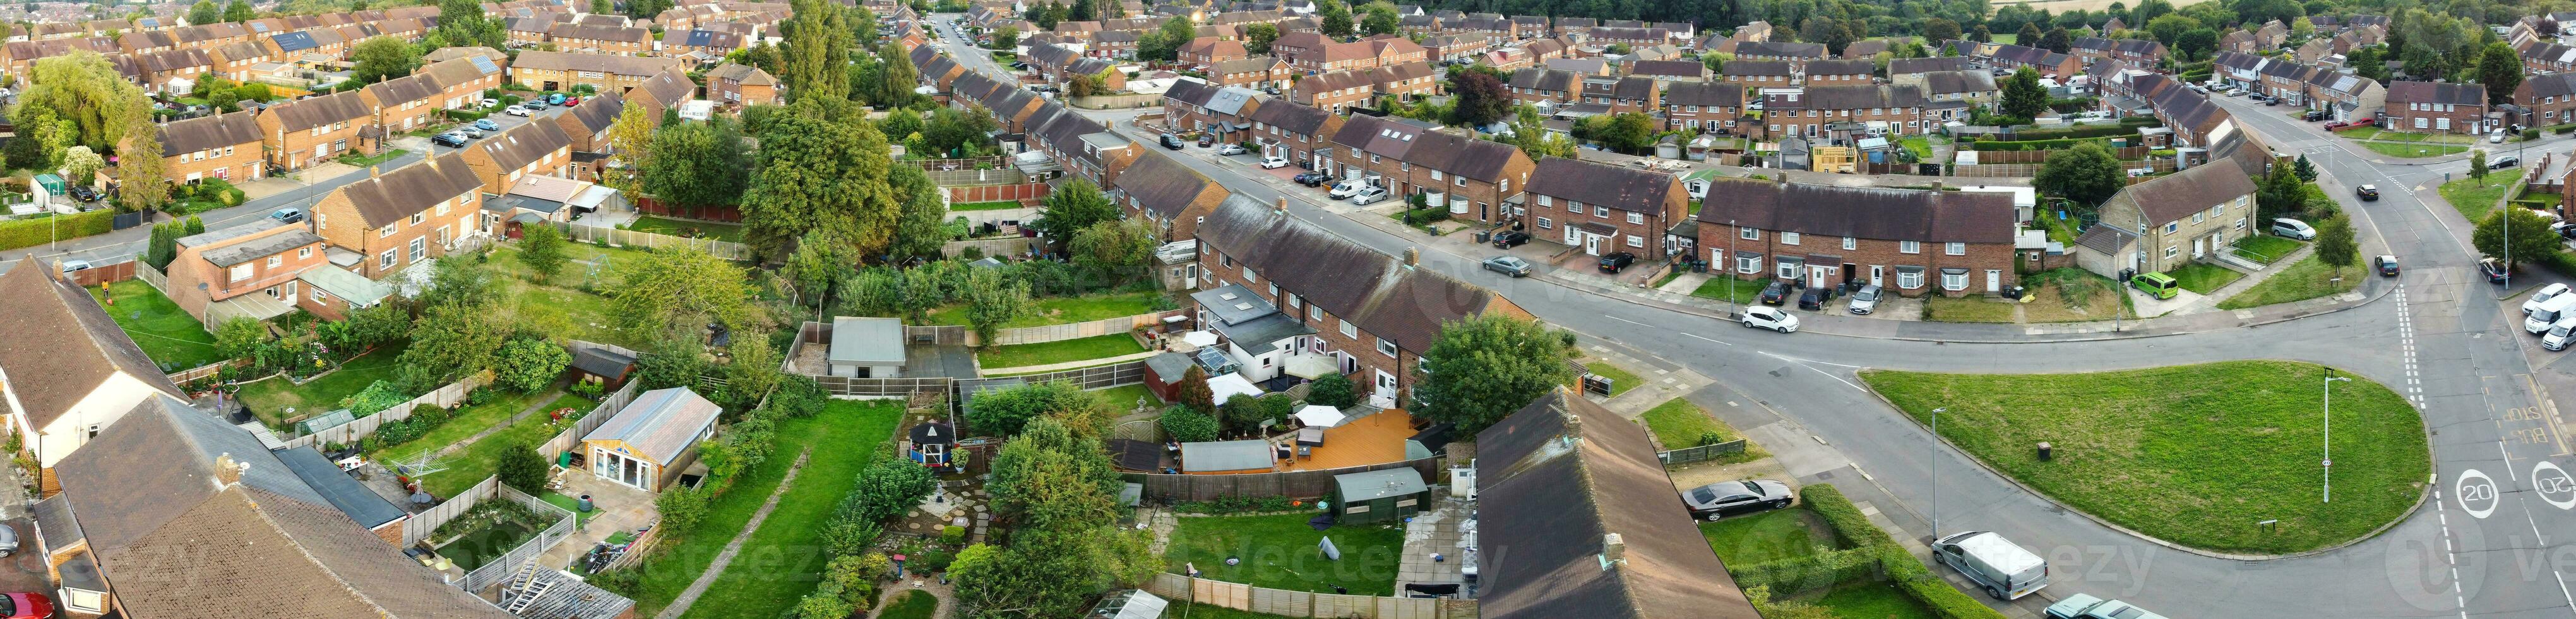 Aerial View of Residential Homes and Industrial Estate Combined at Dallow Road Near Farley Hills Luton City, England UK. The High Angle Footage Was Captured with Drone's Camera on September 7th, 2023 photo